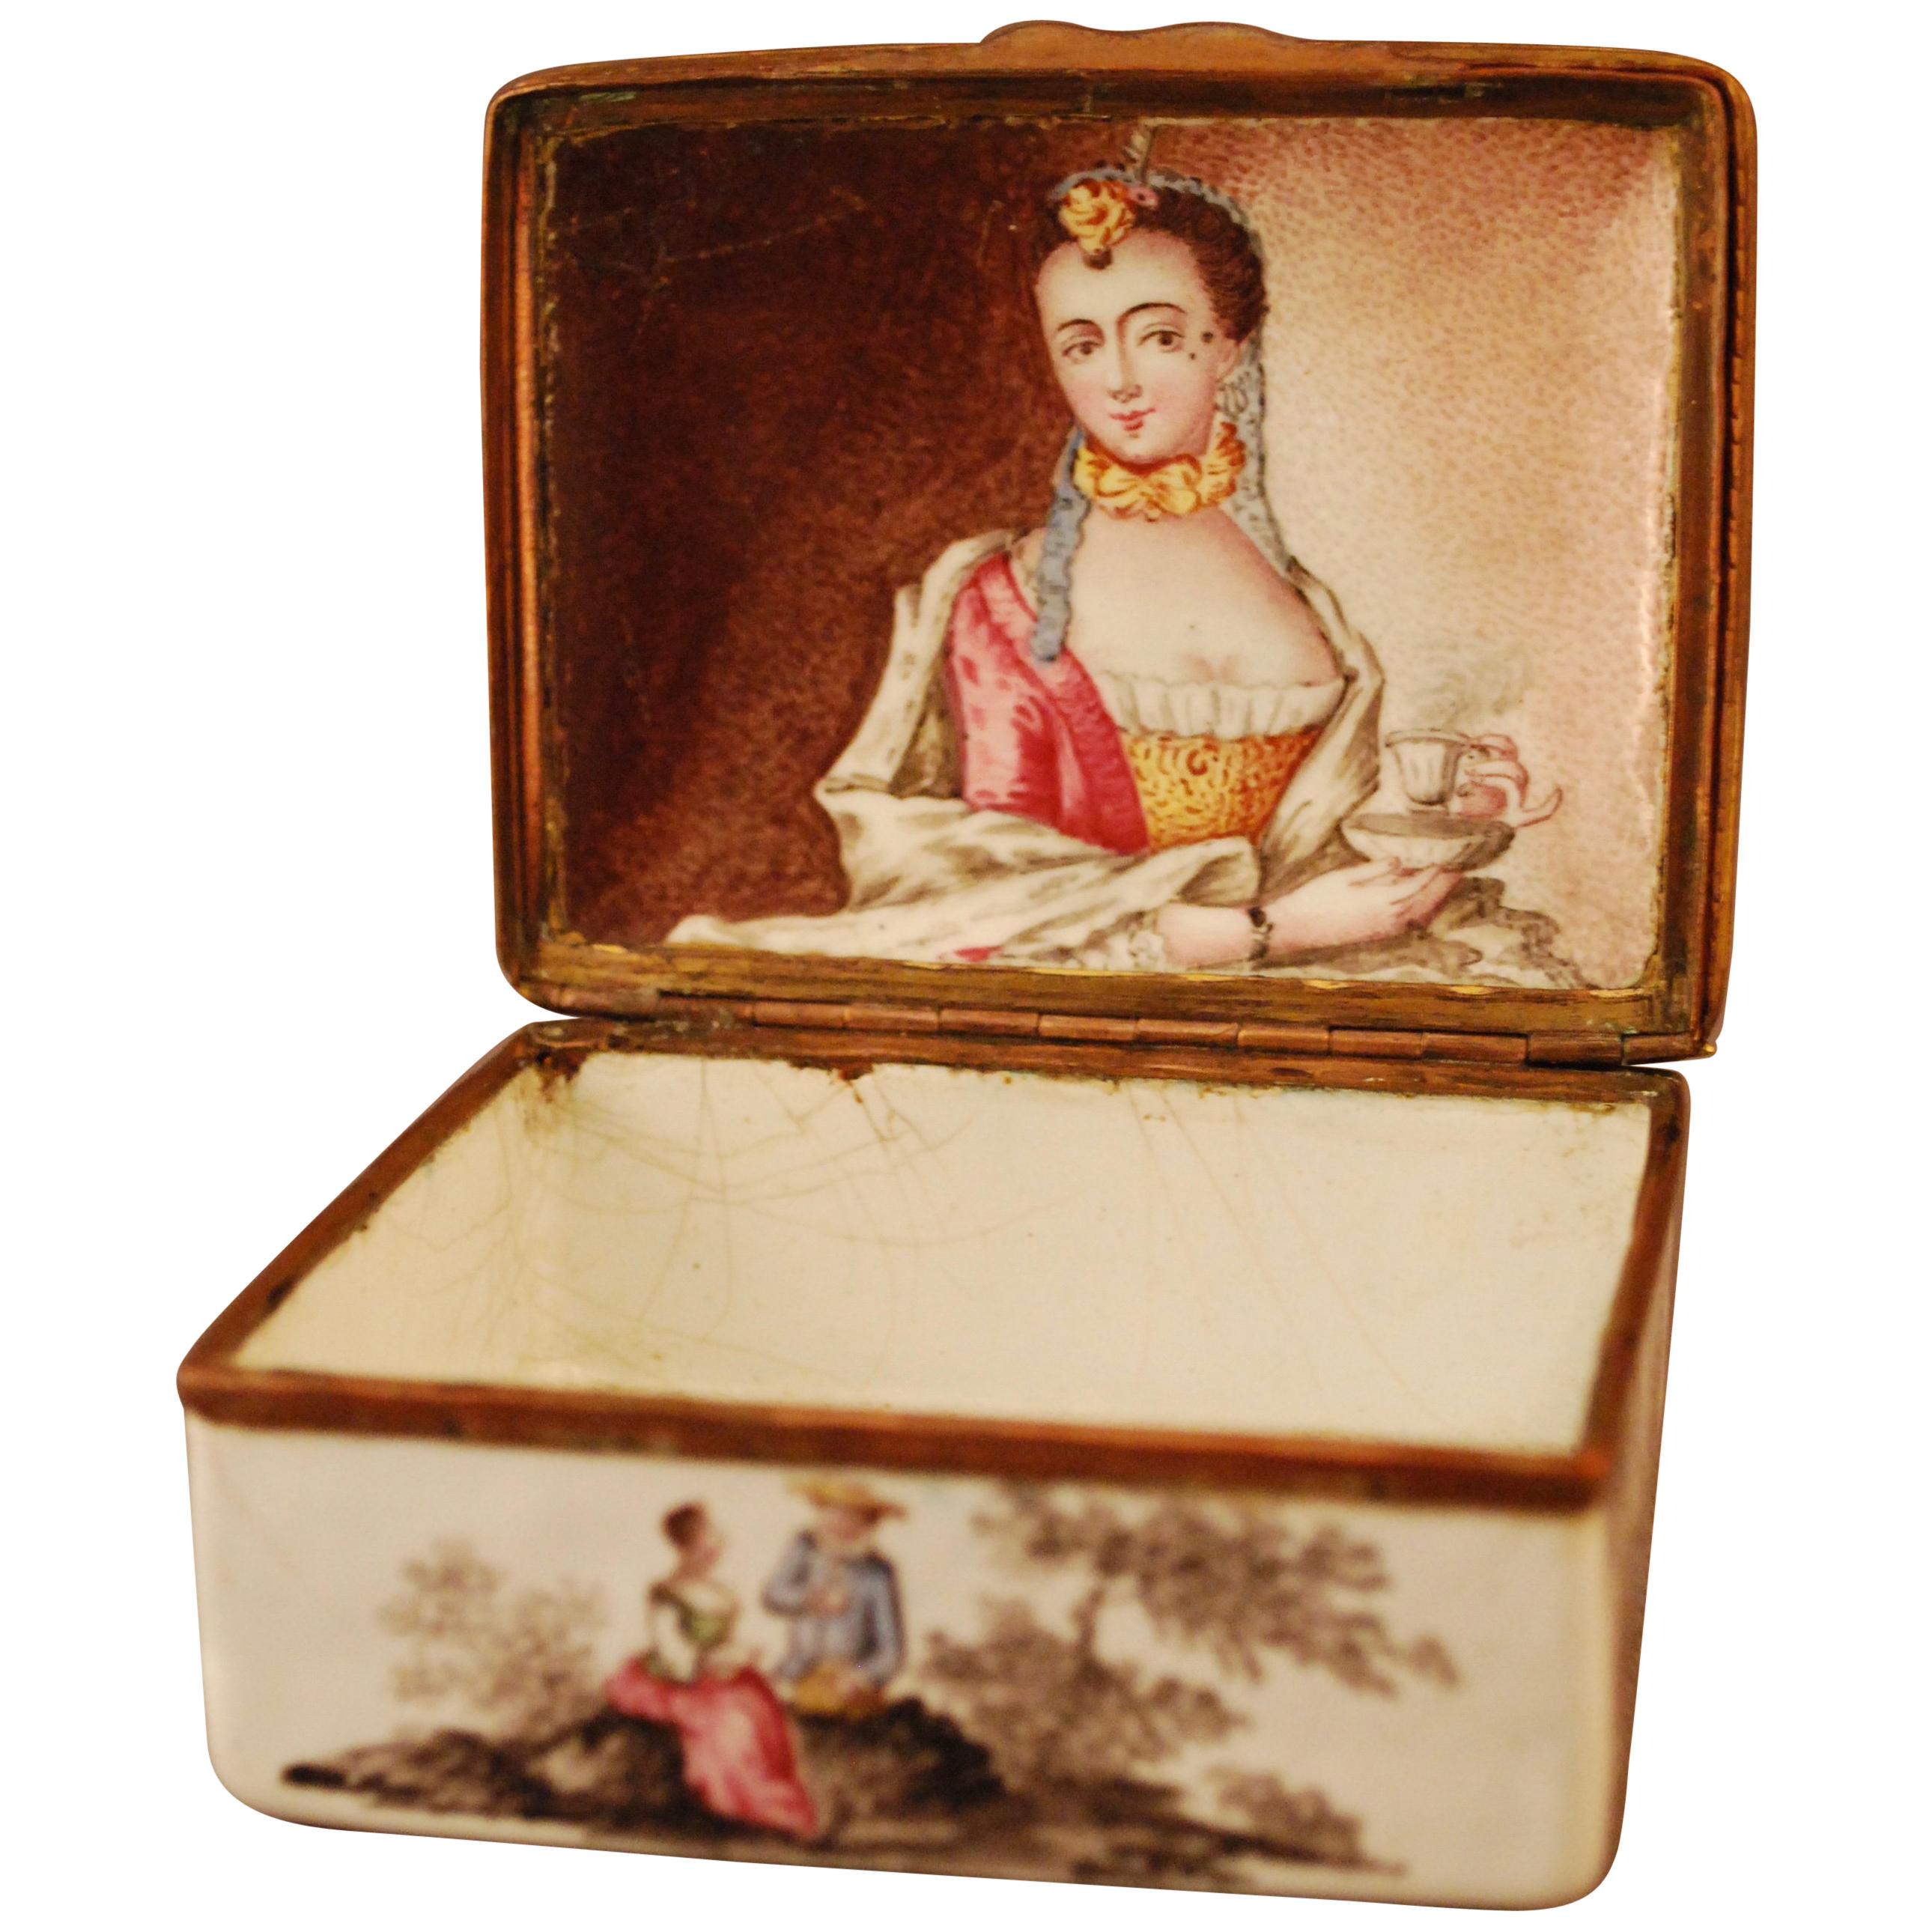 Erotic Snuff Tobacco Box with Highly Explicit Erotic Scenes Behind Secret Lid